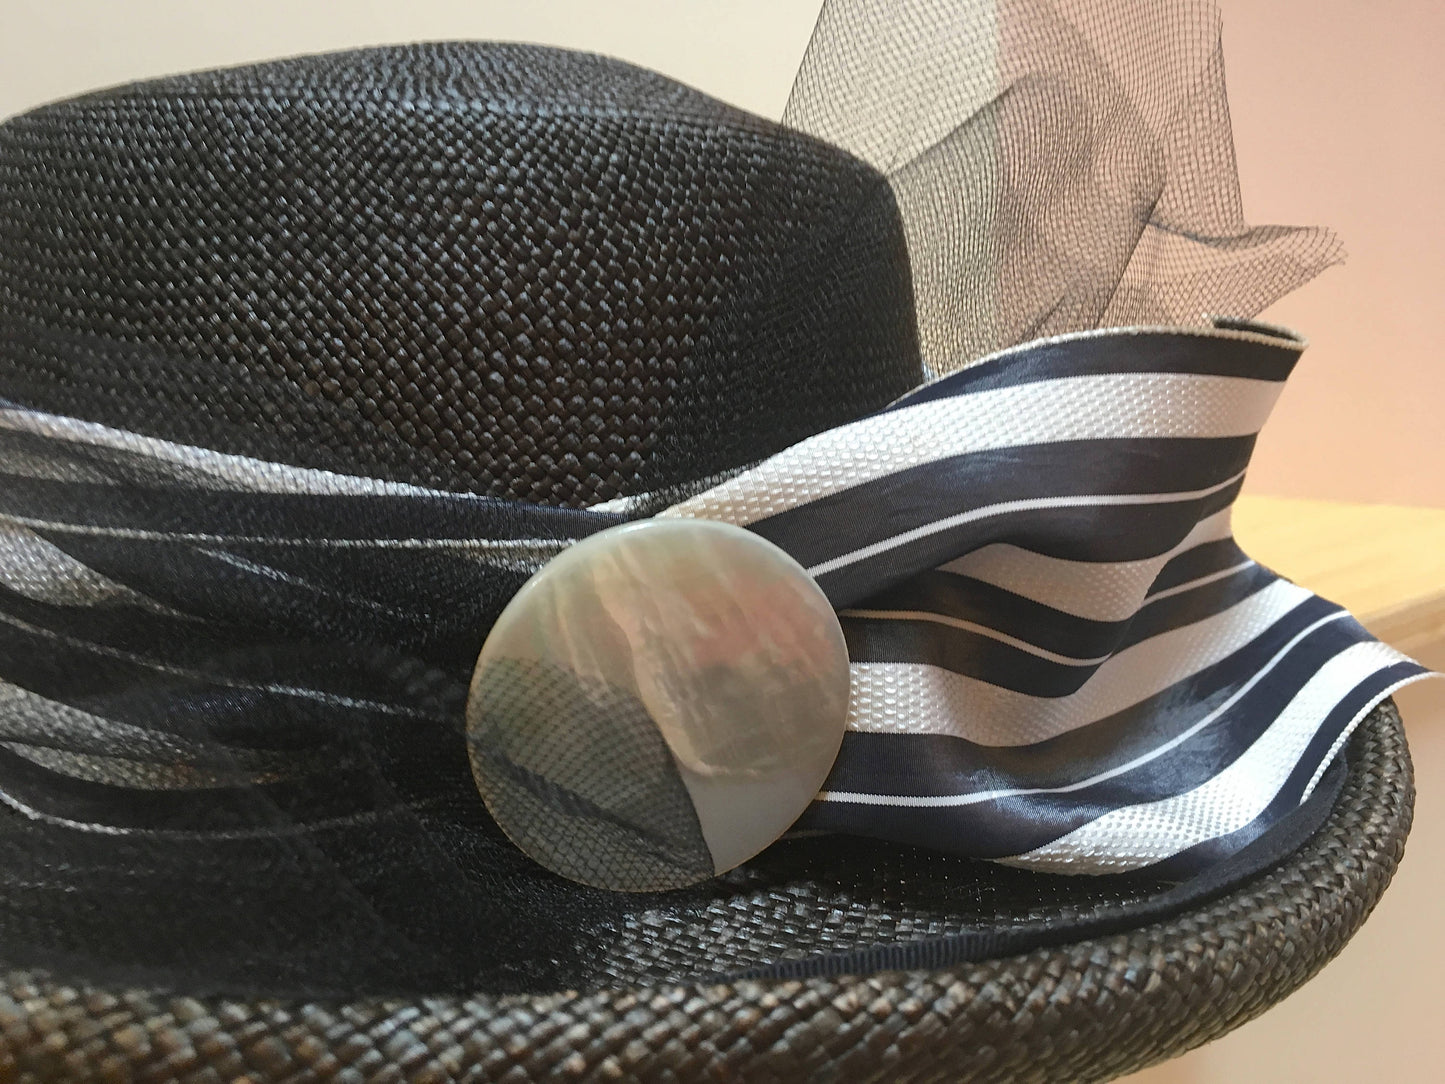 Brown Straw Wide Brimmed Hat-Black trim-Netting-Vintage White and Navy Striped Ribbon-Mother of Pearl Button-Wedding-Sun Hat-Race Track Hat!